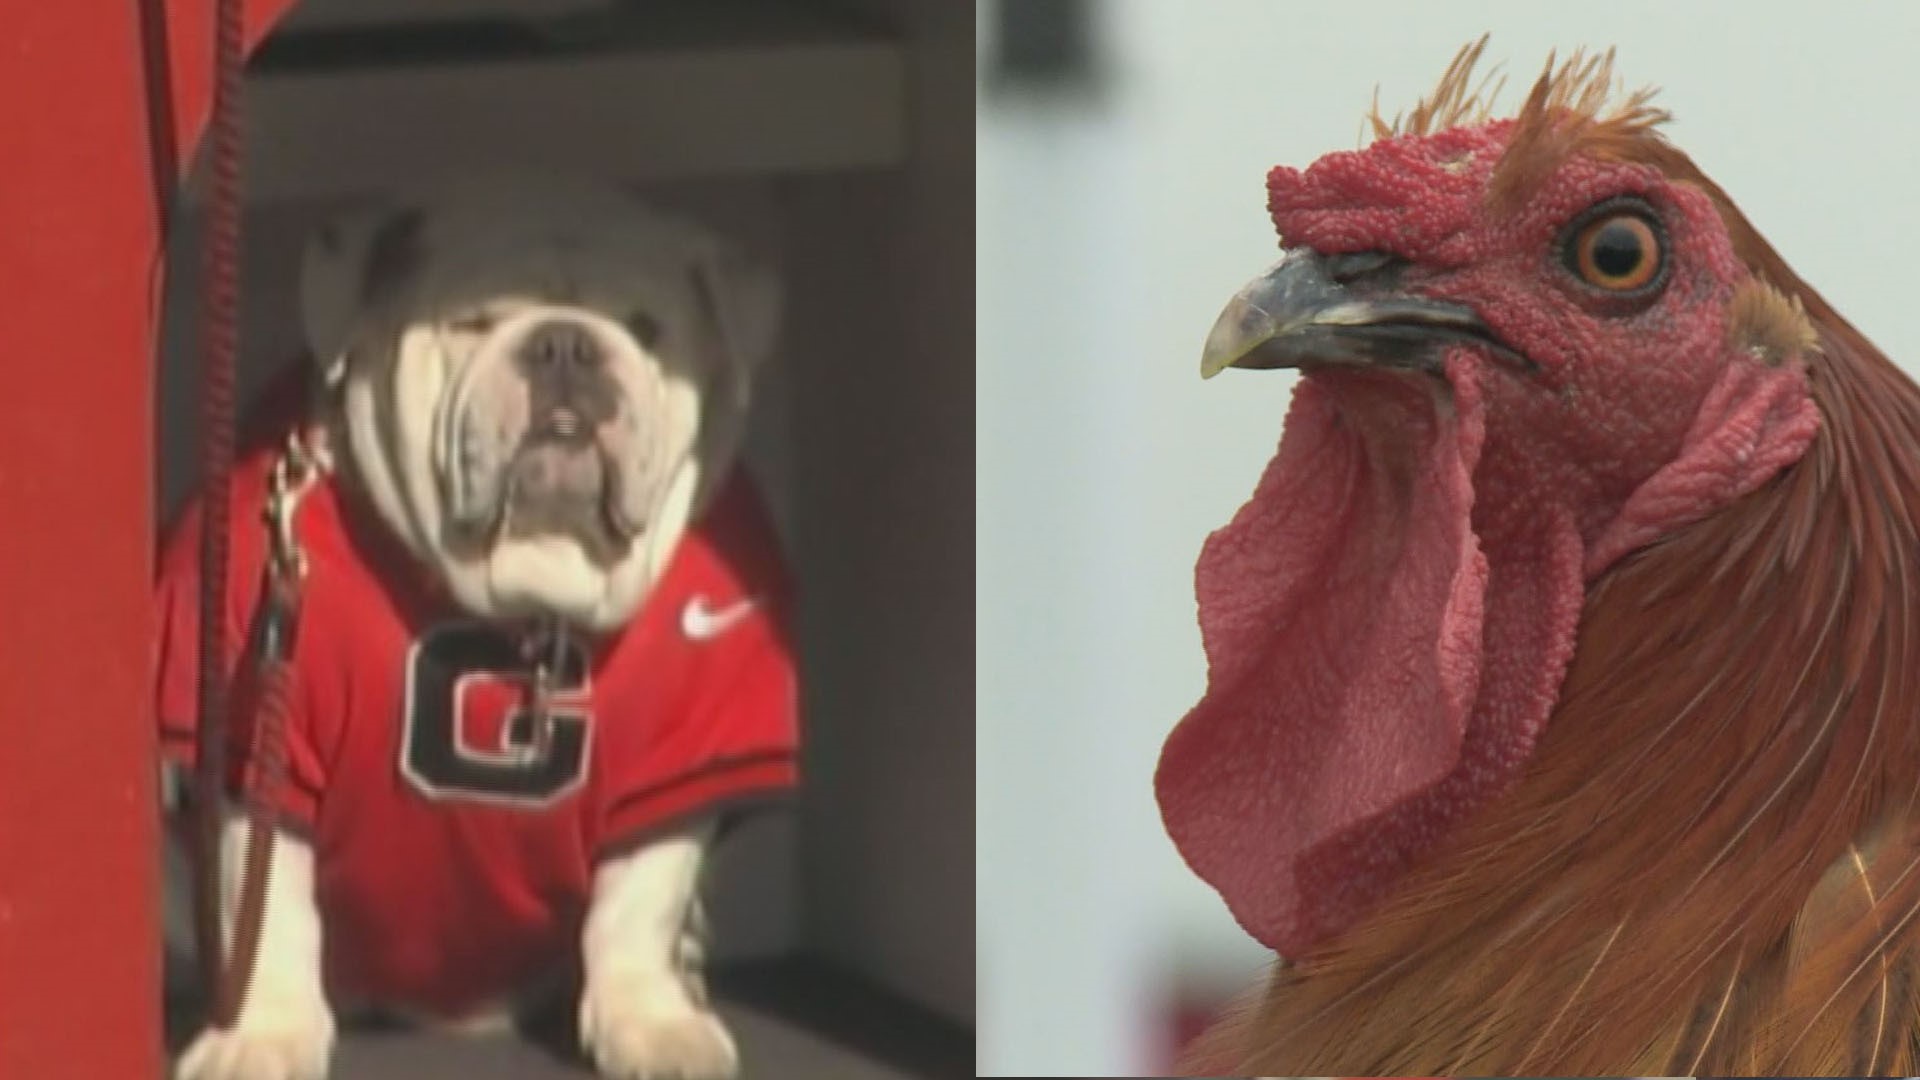 The Gamecocks and Bulldogs have been playing against each other since 1894.